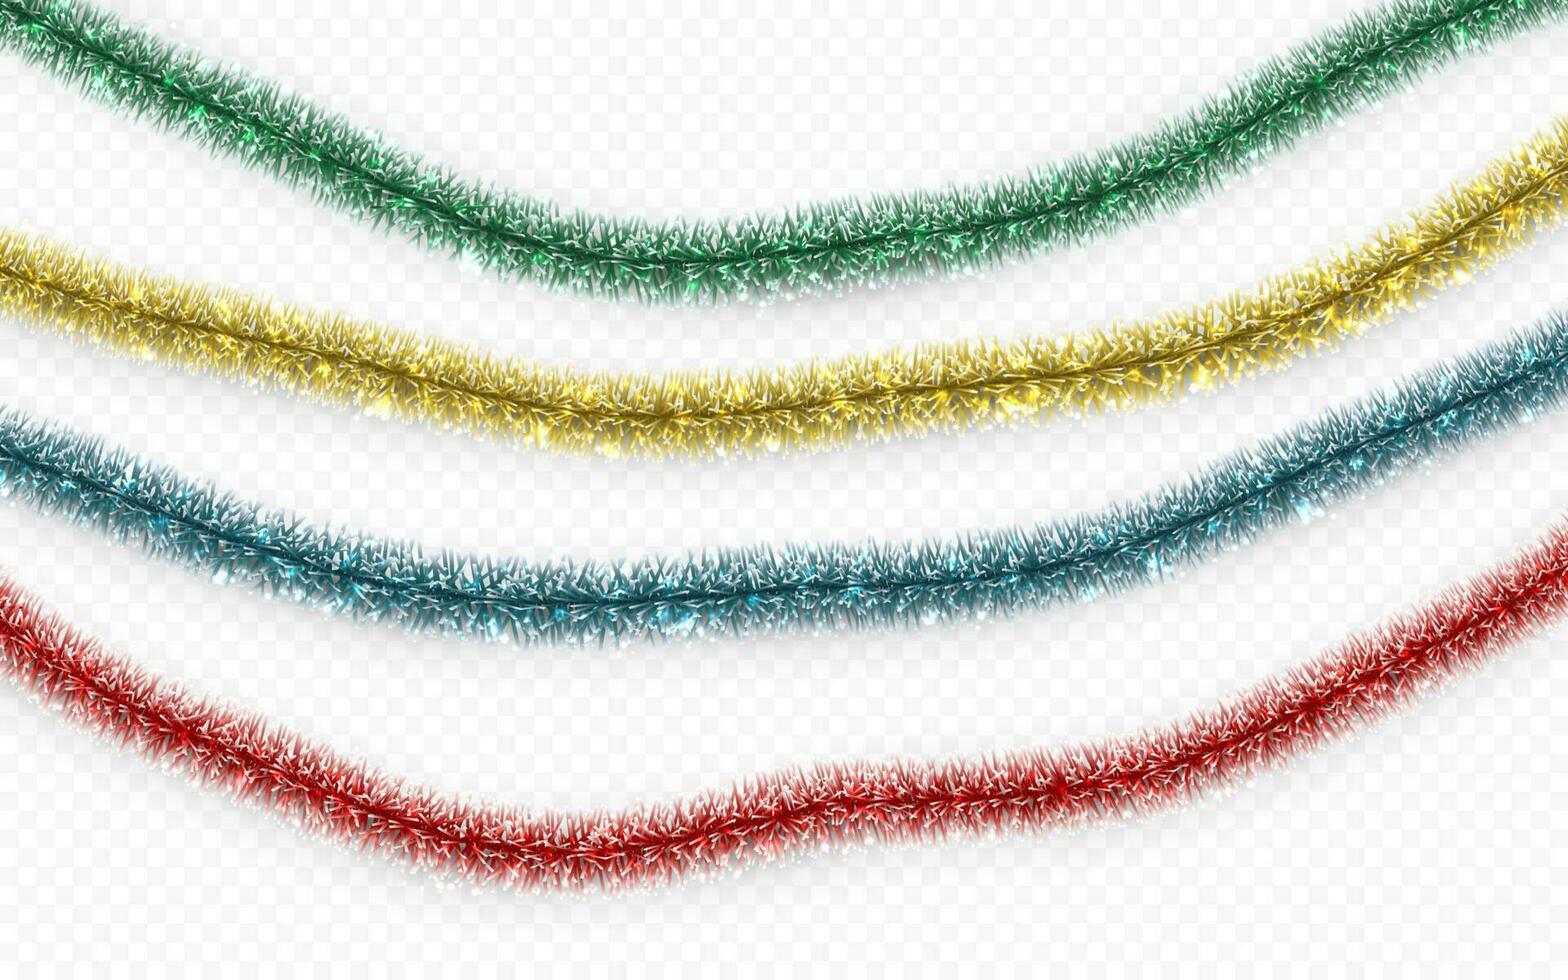 Christmas or New Year traditional decorations. Hanging glitter Xmas tinsel garland. Decor element. Vector illustration